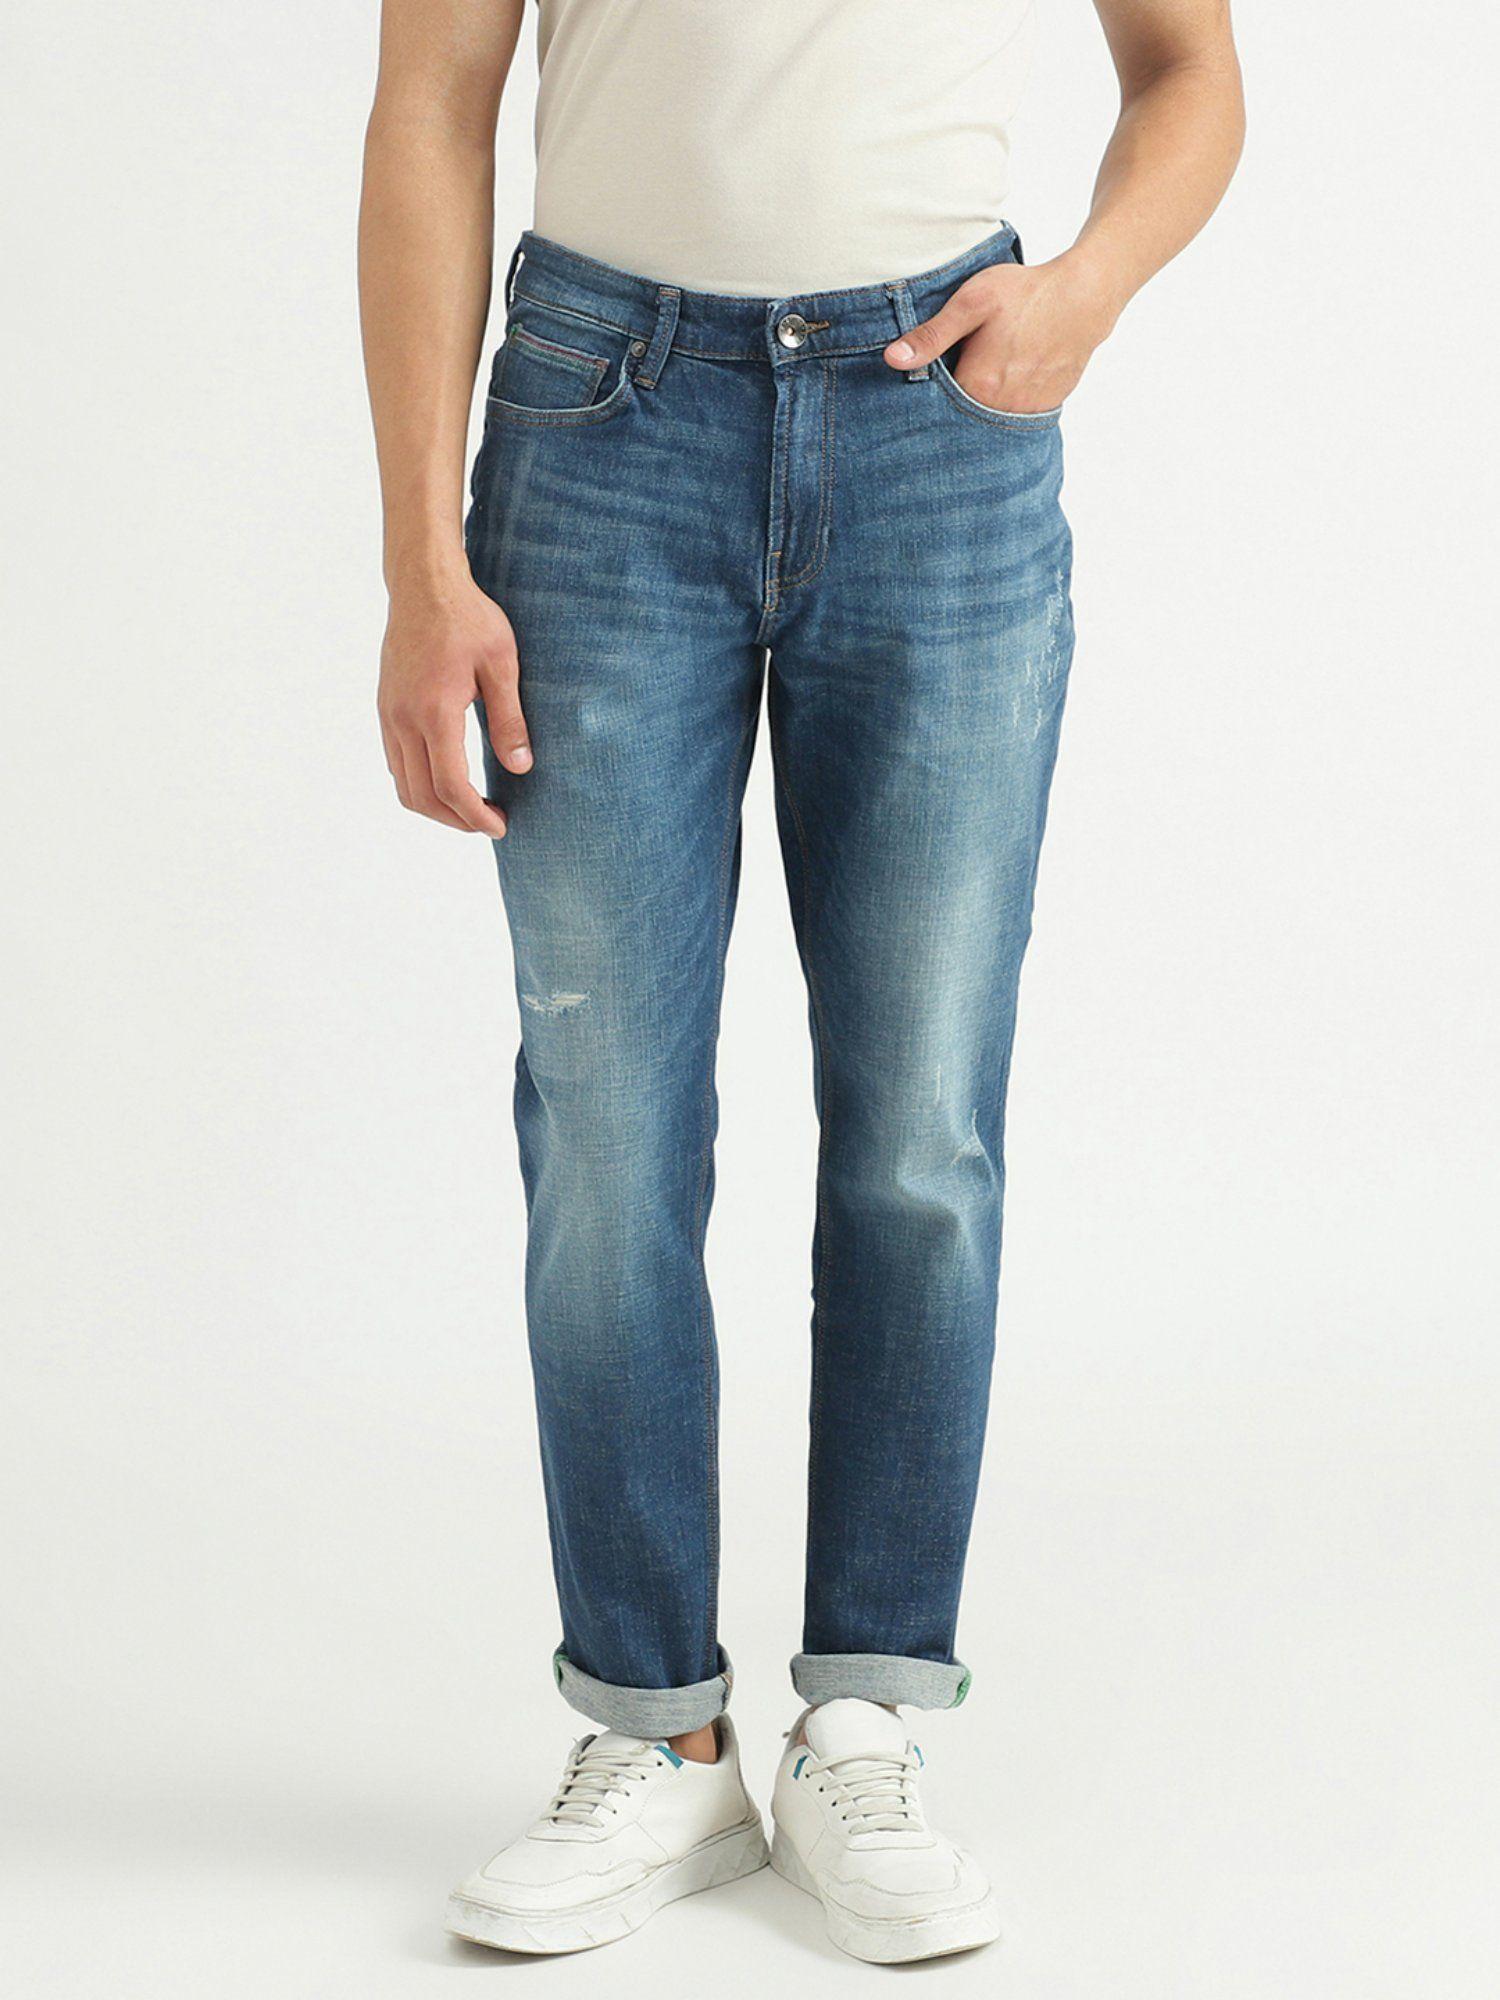 mens-solid-jeans-blue